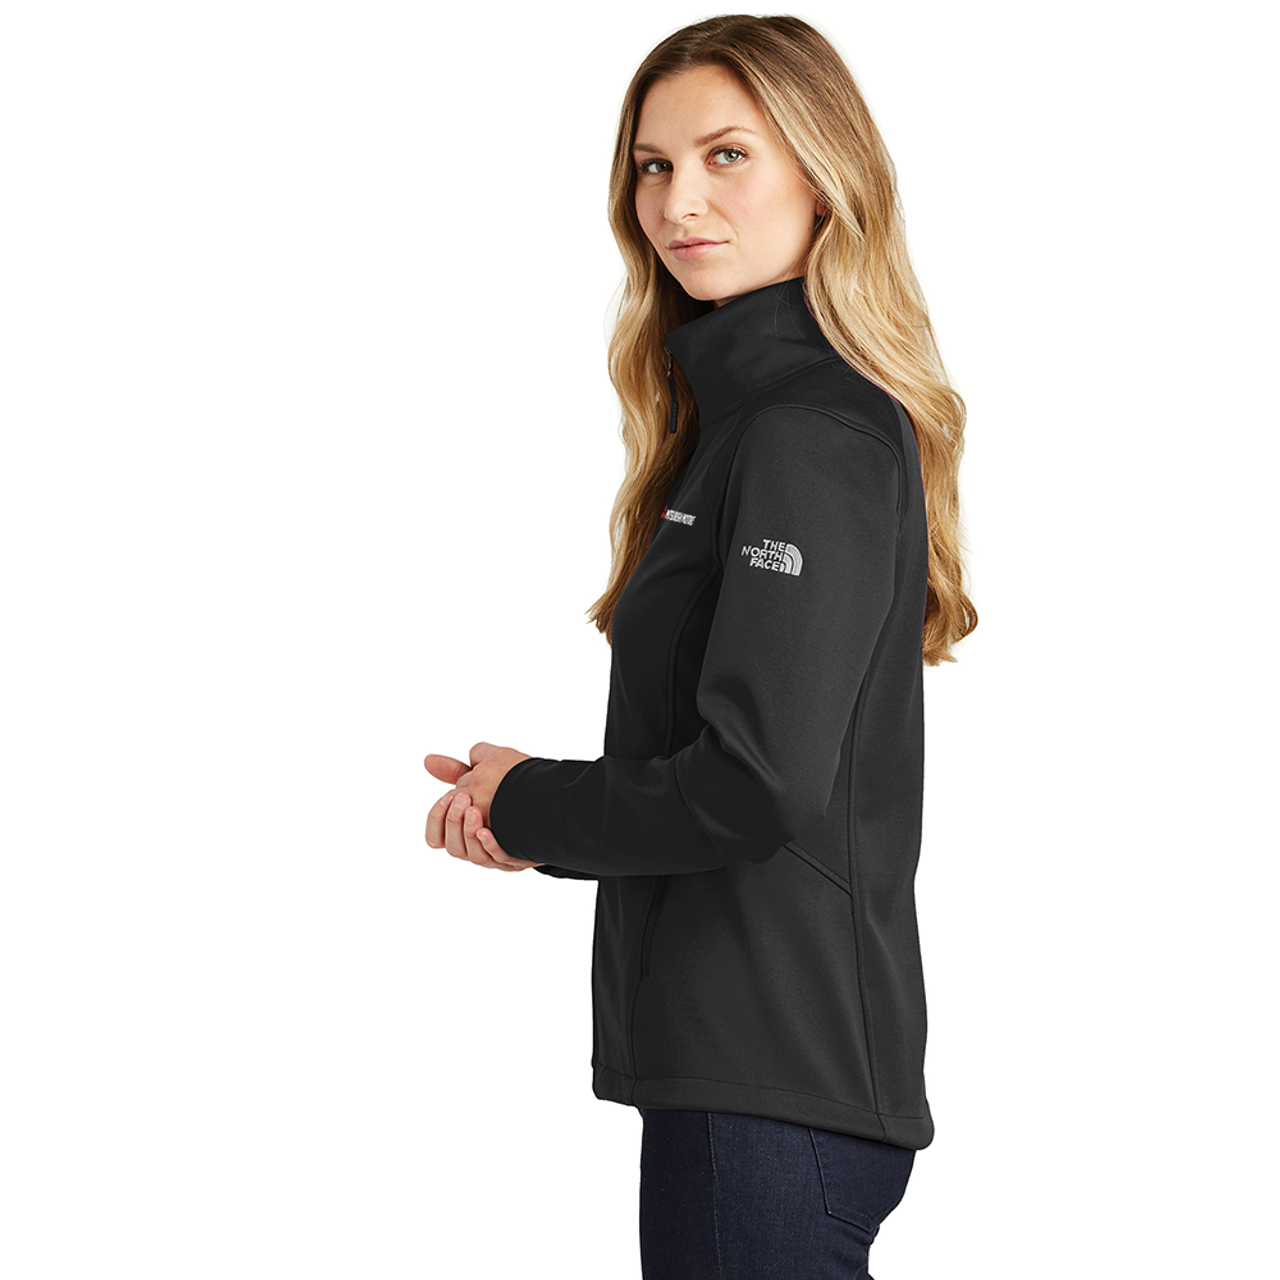 The North Face Women's Soft Shell